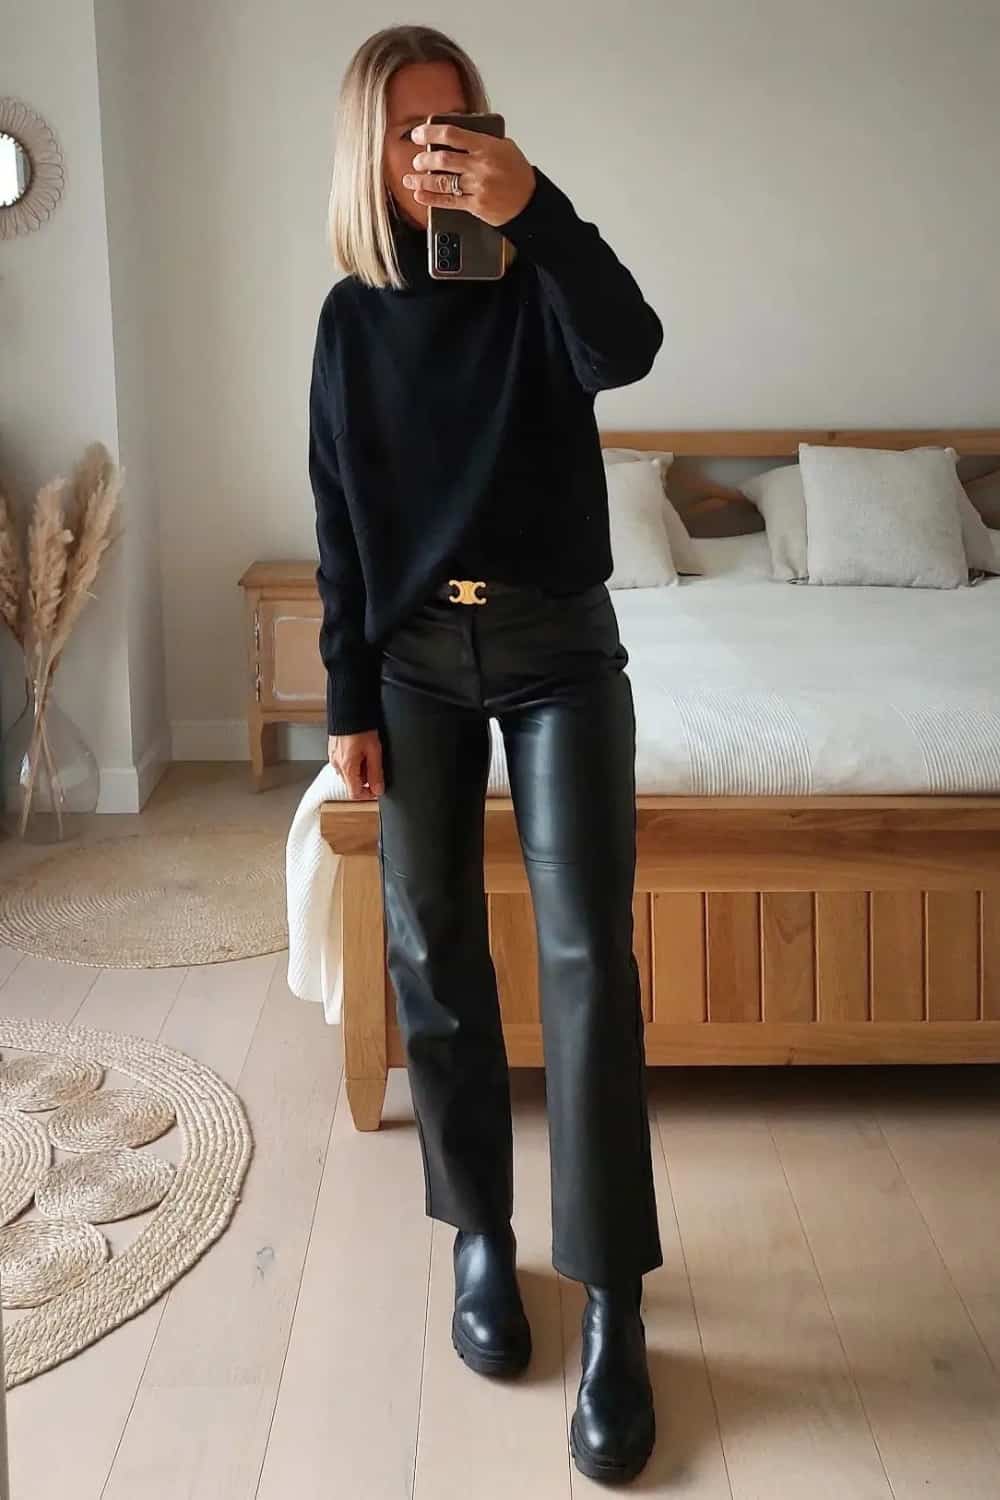 Black turtleneck Sweater outfit with Leather Pants